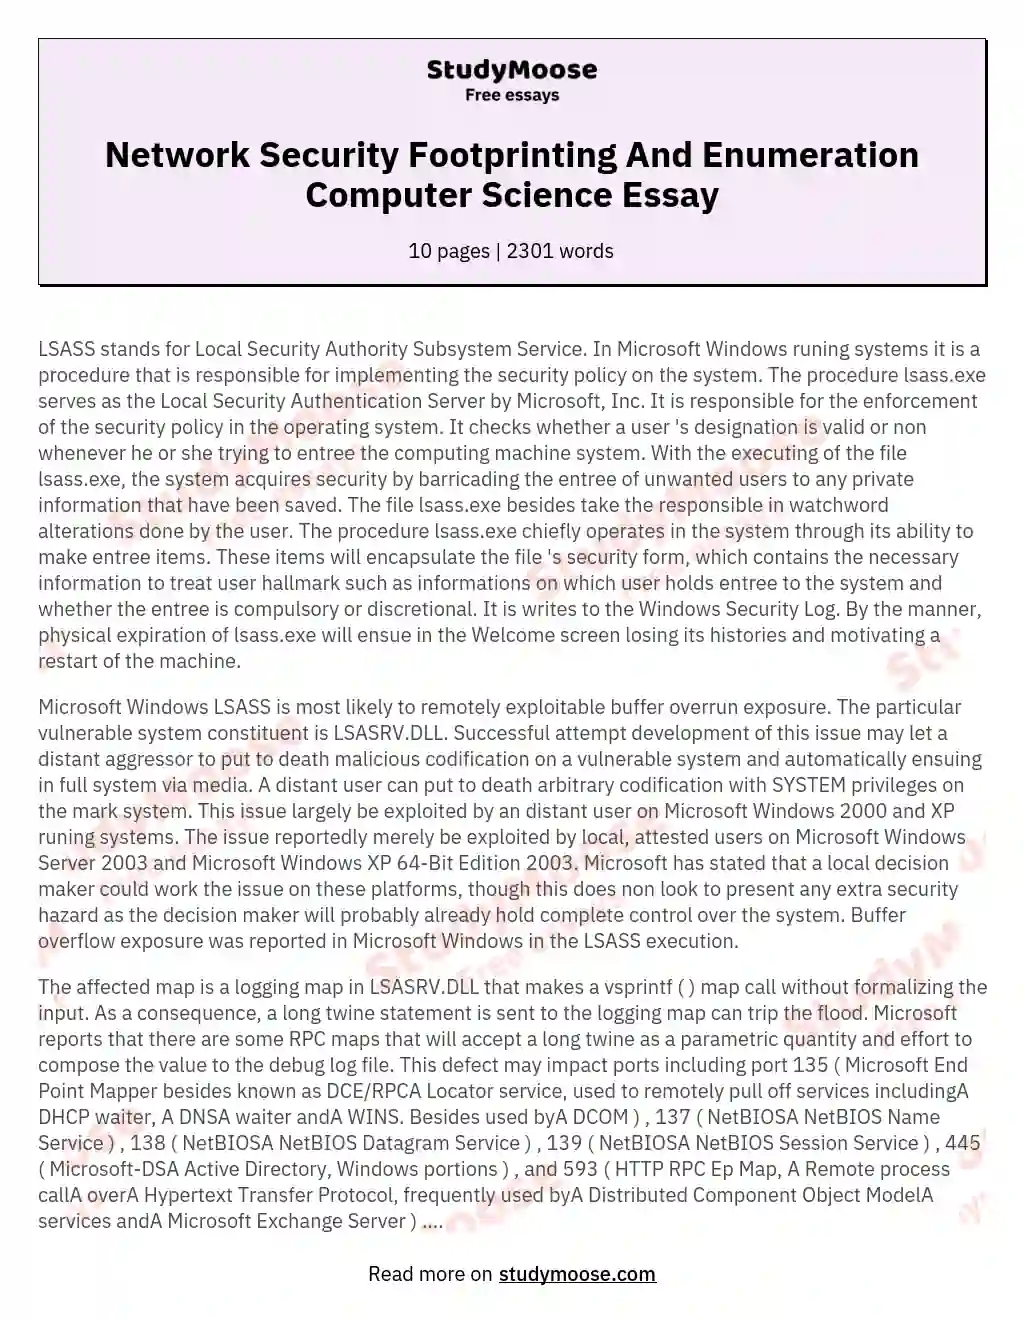 Network Security Footprinting And Enumeration Computer Science Essay essay